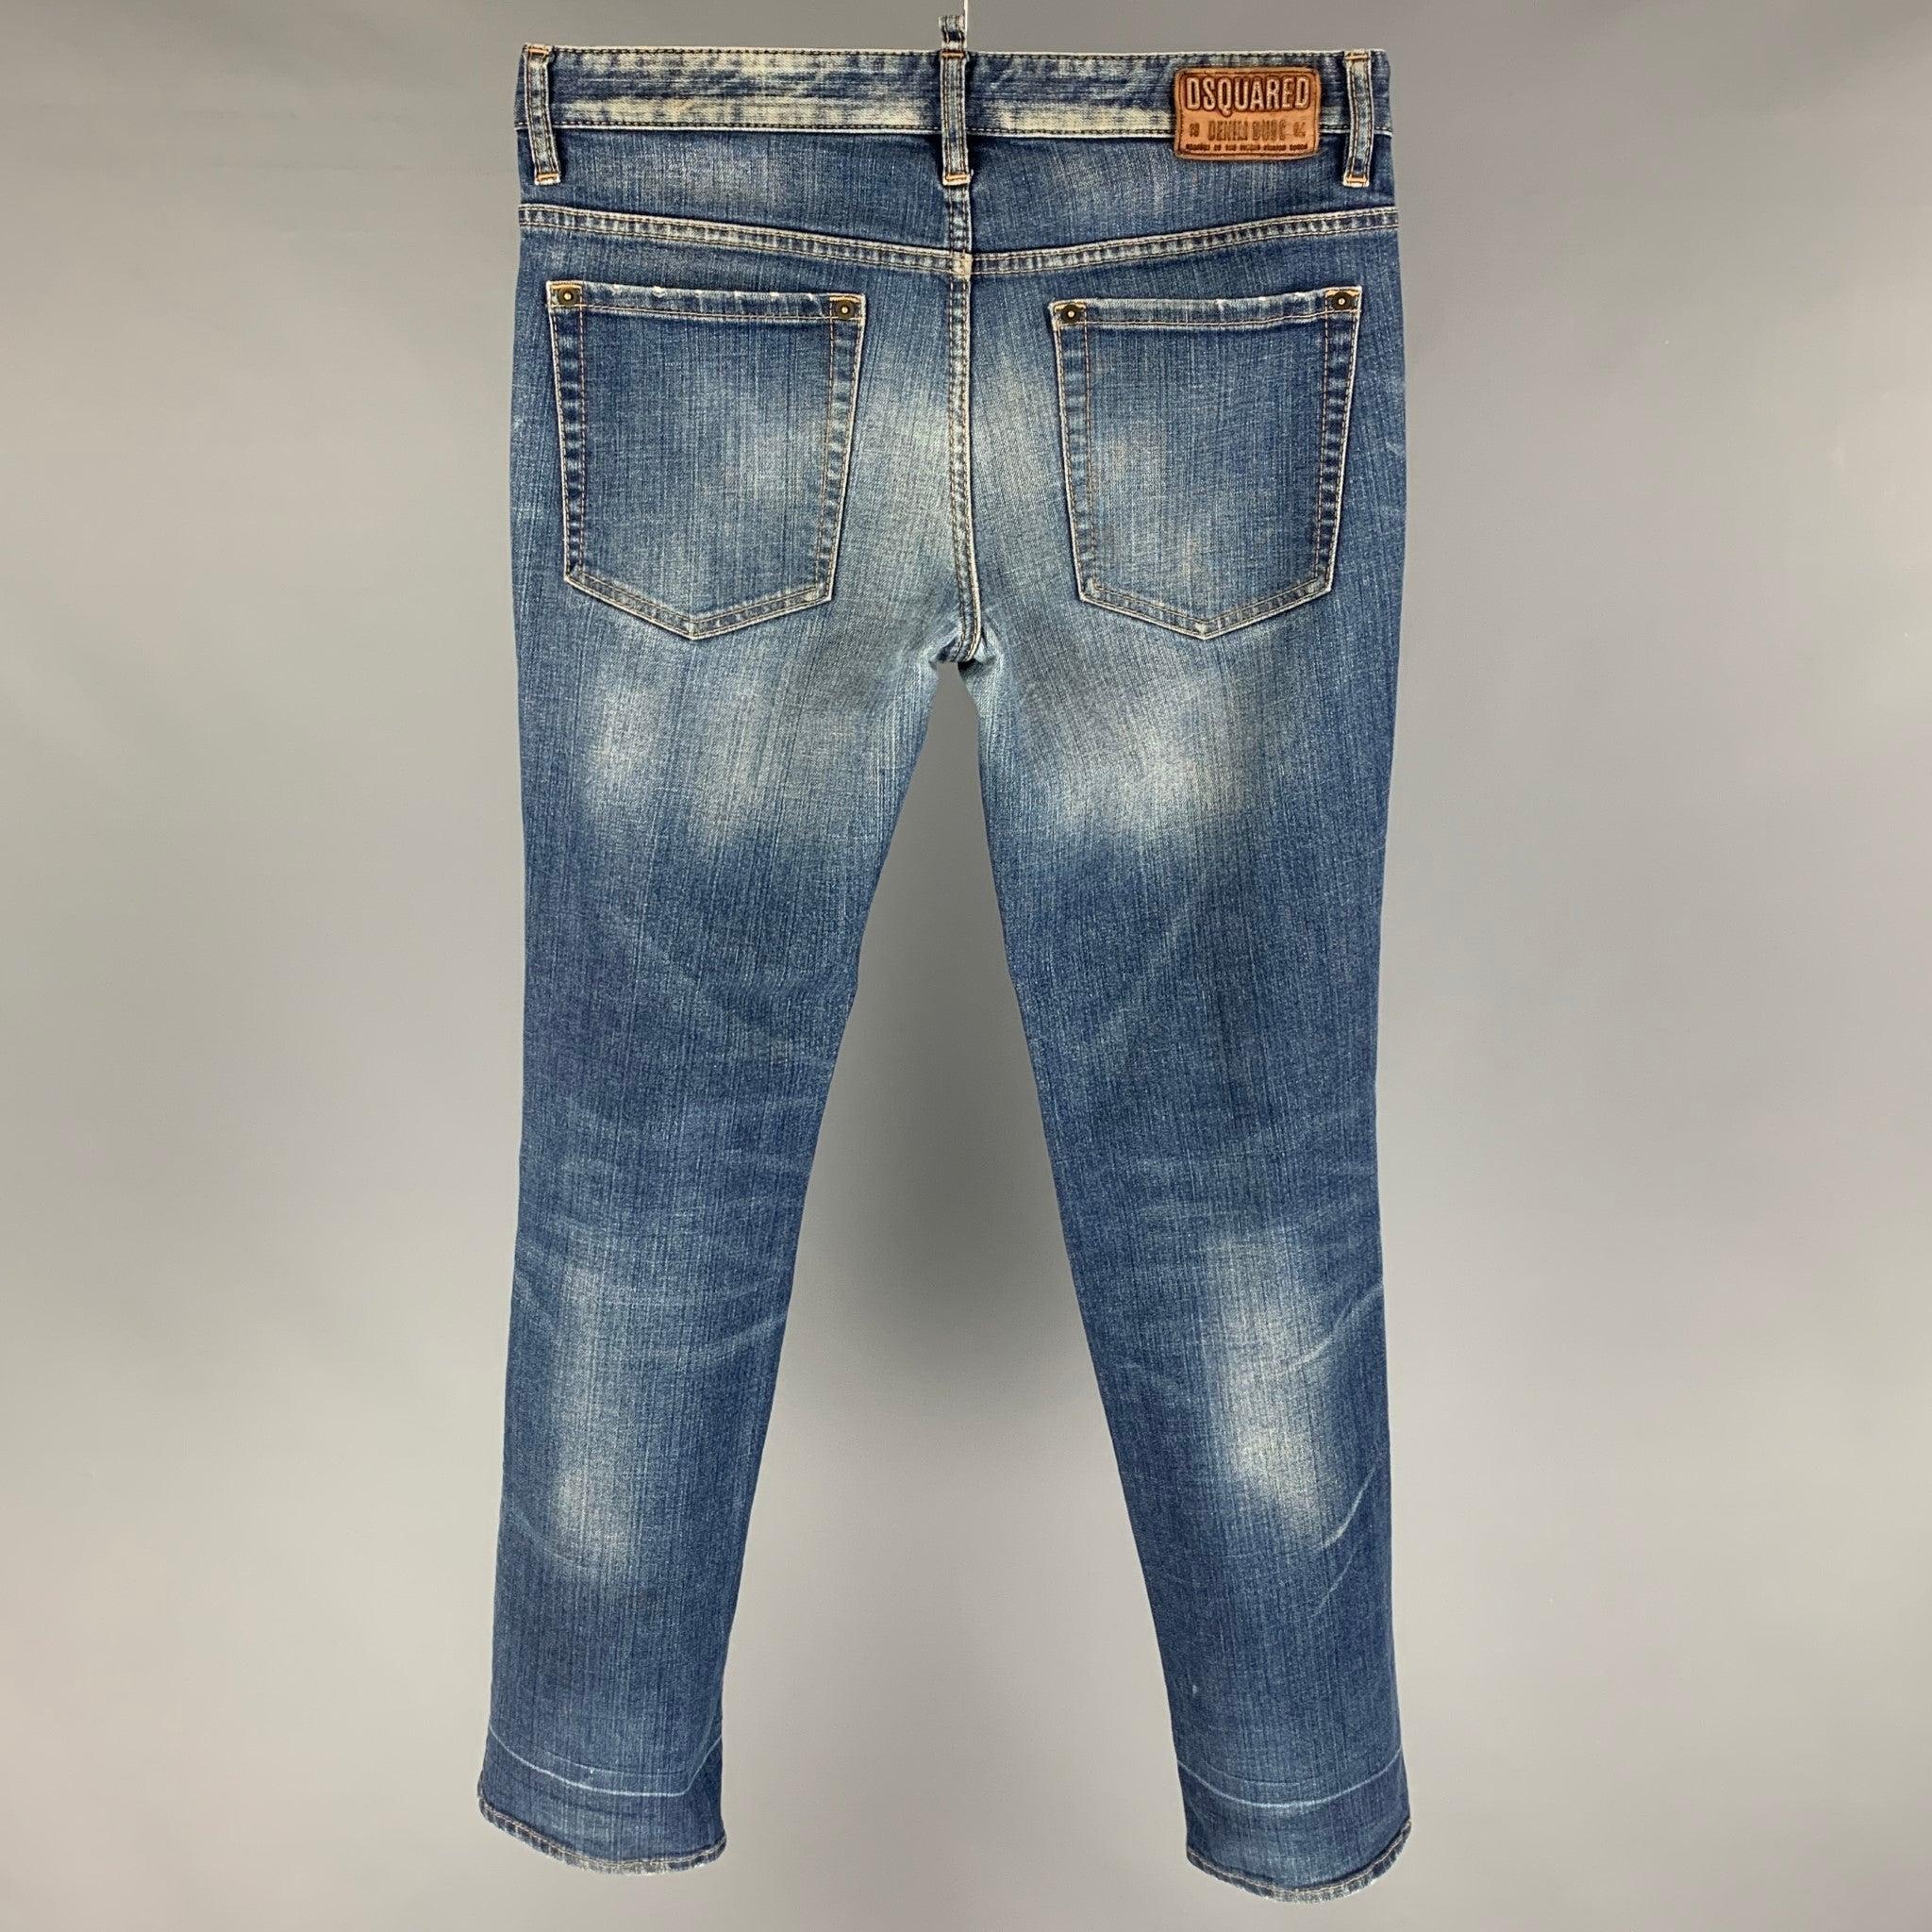 DSQUARED2 jeans comes in a indigo distressed cotton featuring a skinny fit, contrast stitching, and a button fly closure. Made in Italy.
Very Good
Pre-Owned Condition. 

Marked:   46 

Measurements: 
  Waist: 32 inches Rise:
9 inches  Inseam: 30